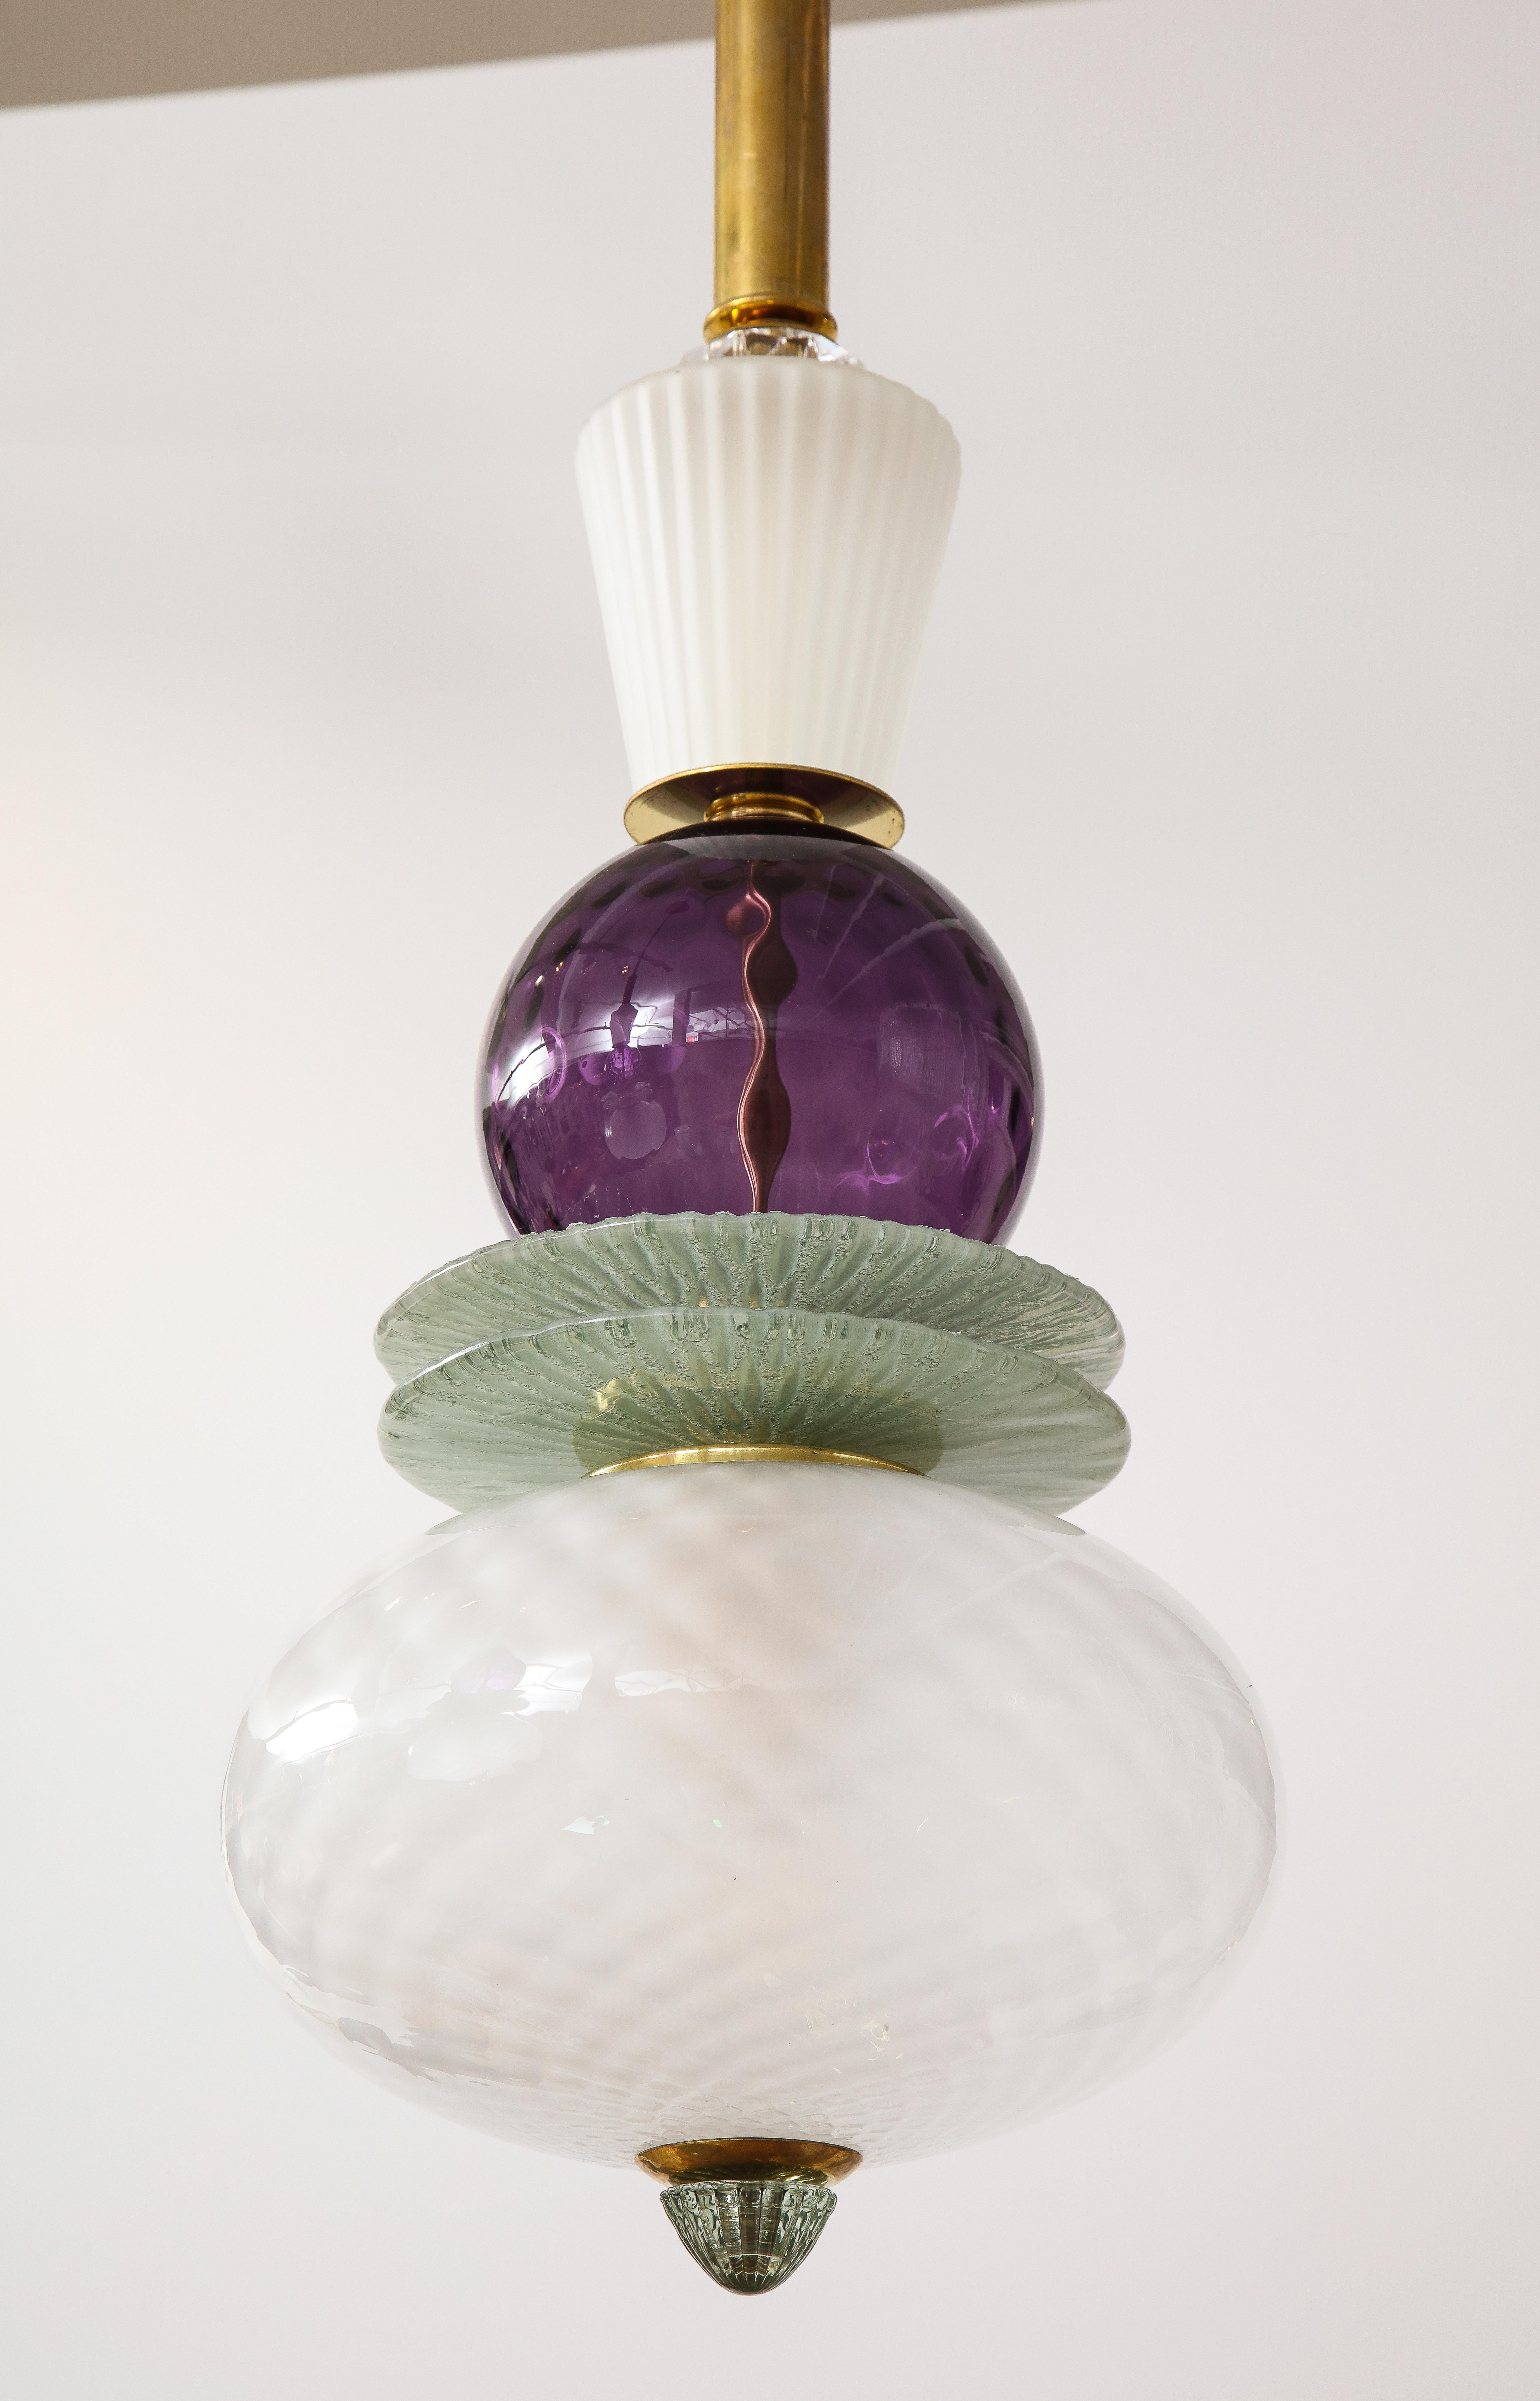 One of a kind pair of Murano glass globes and brass pendants in hues of white, soft green, and purple, handcrafted in Venice, Italy, 2022. A frosted and textured Murano glass globe is stacked with various Murano glass decorative elements, including